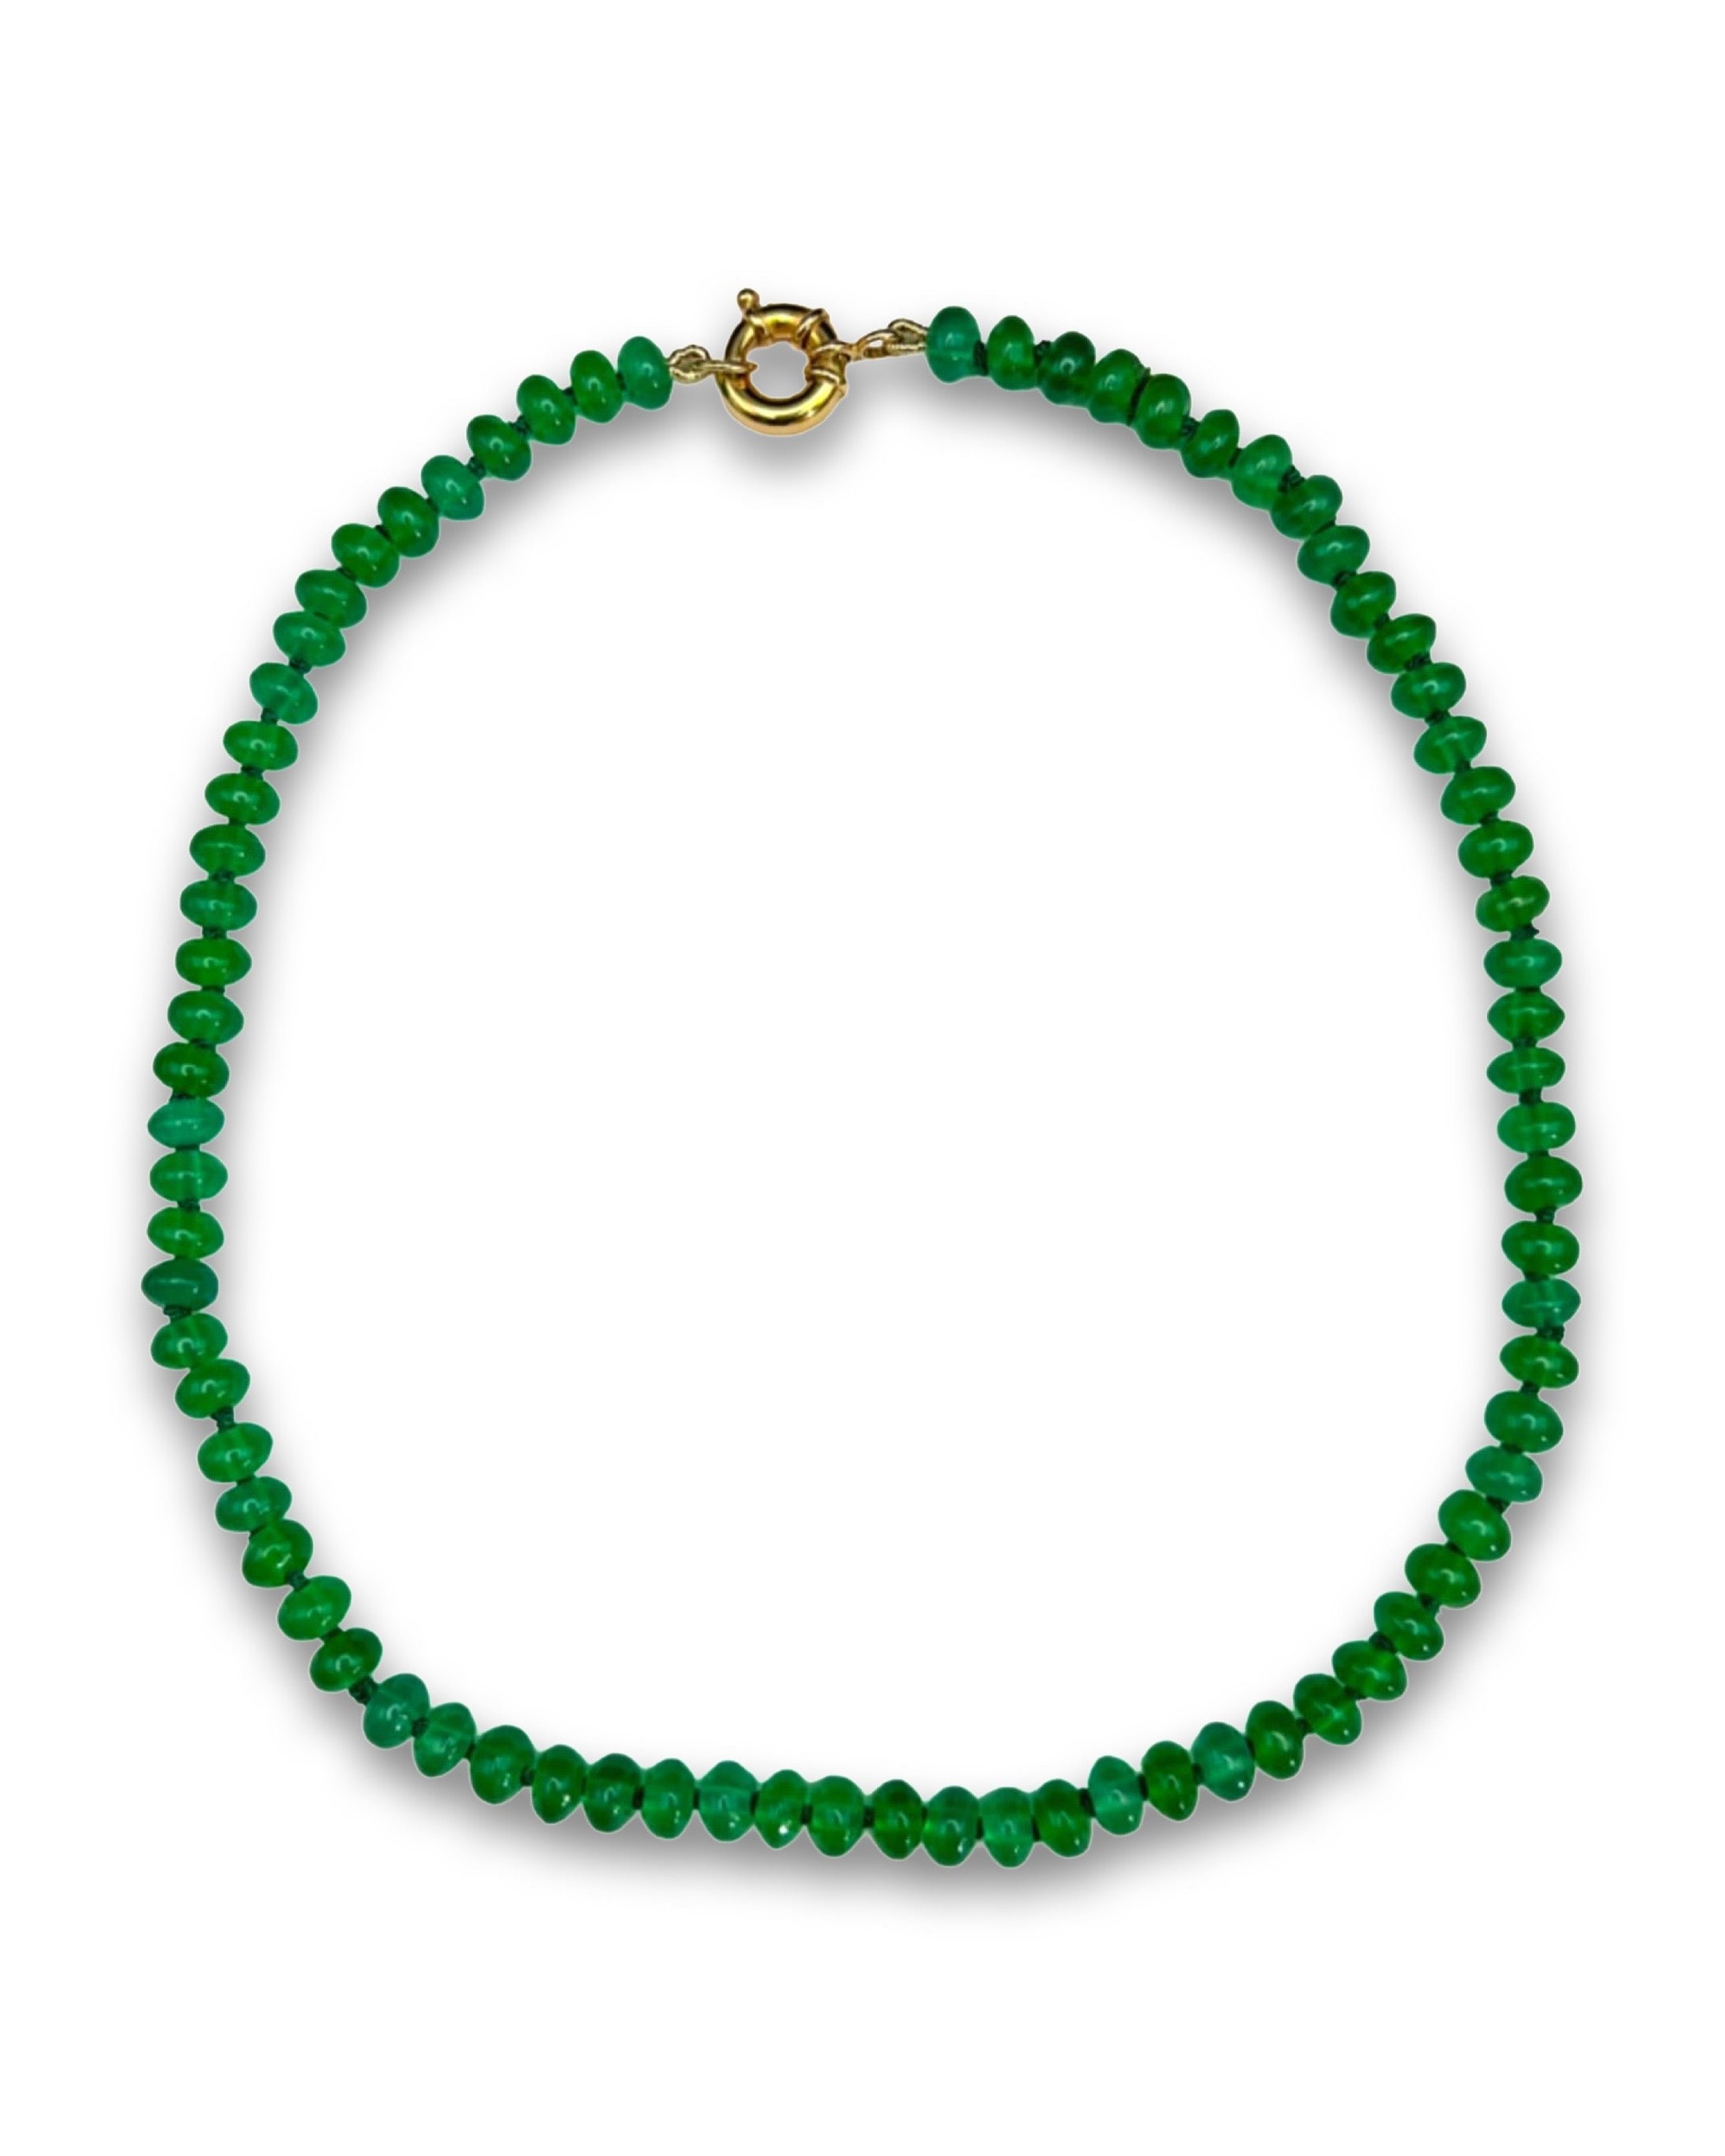 Rajasthan Silver and Green Agate Necklace | Jewelry | Mahakala Fine Arts